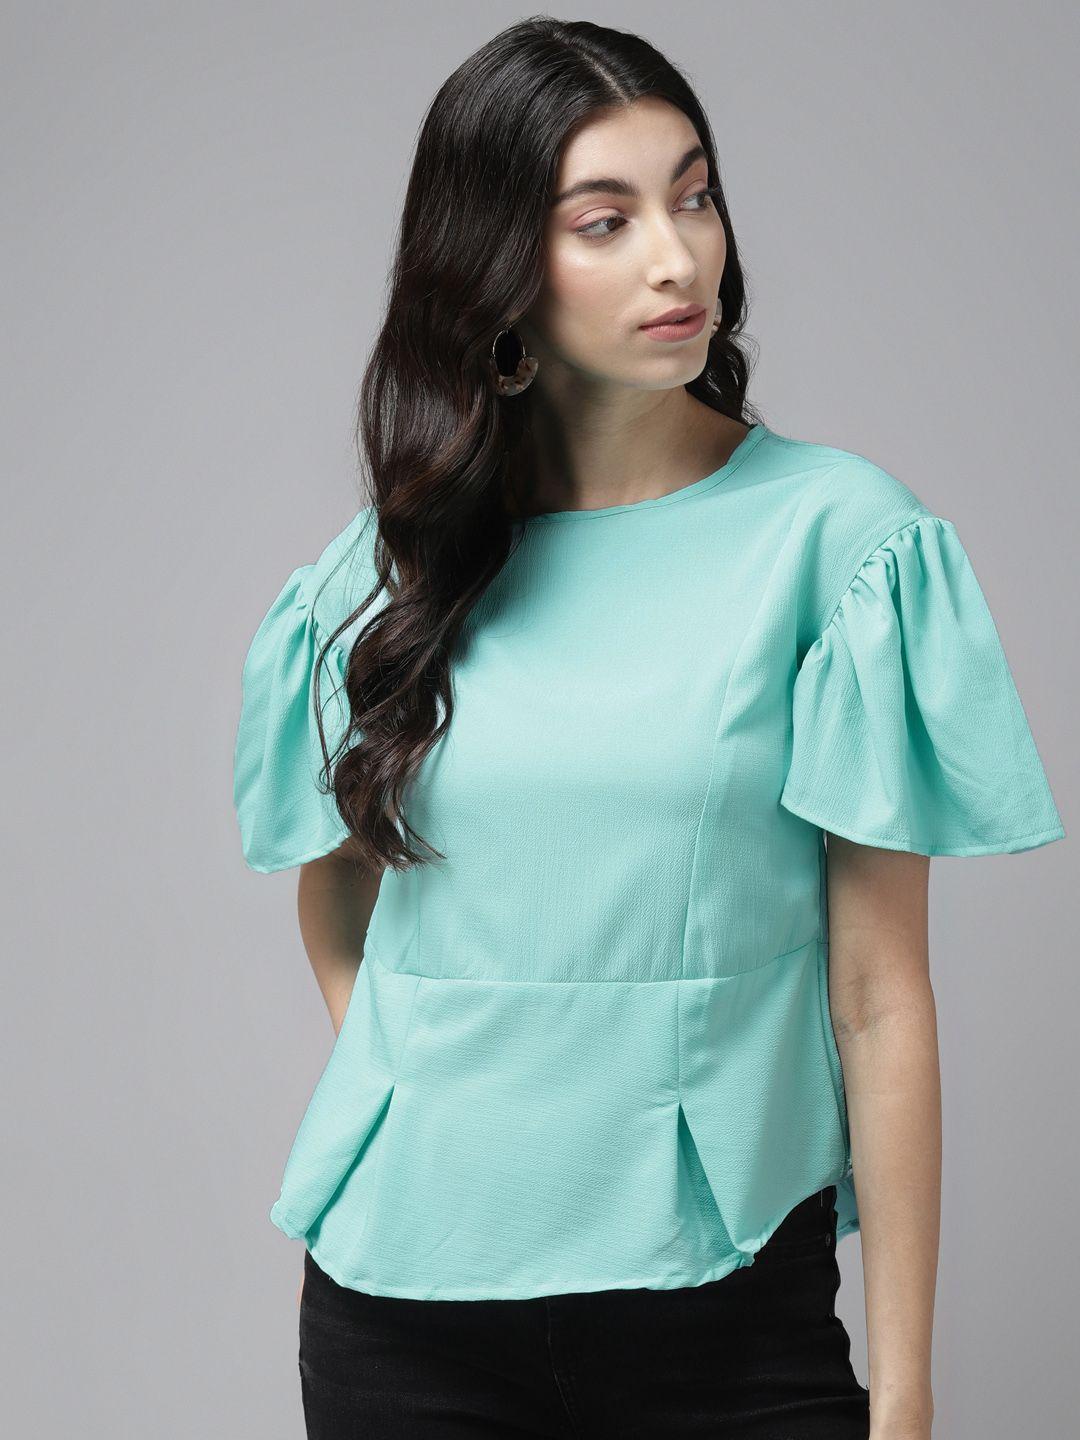 cayman turquoise blue solid flared sleeves a-line top